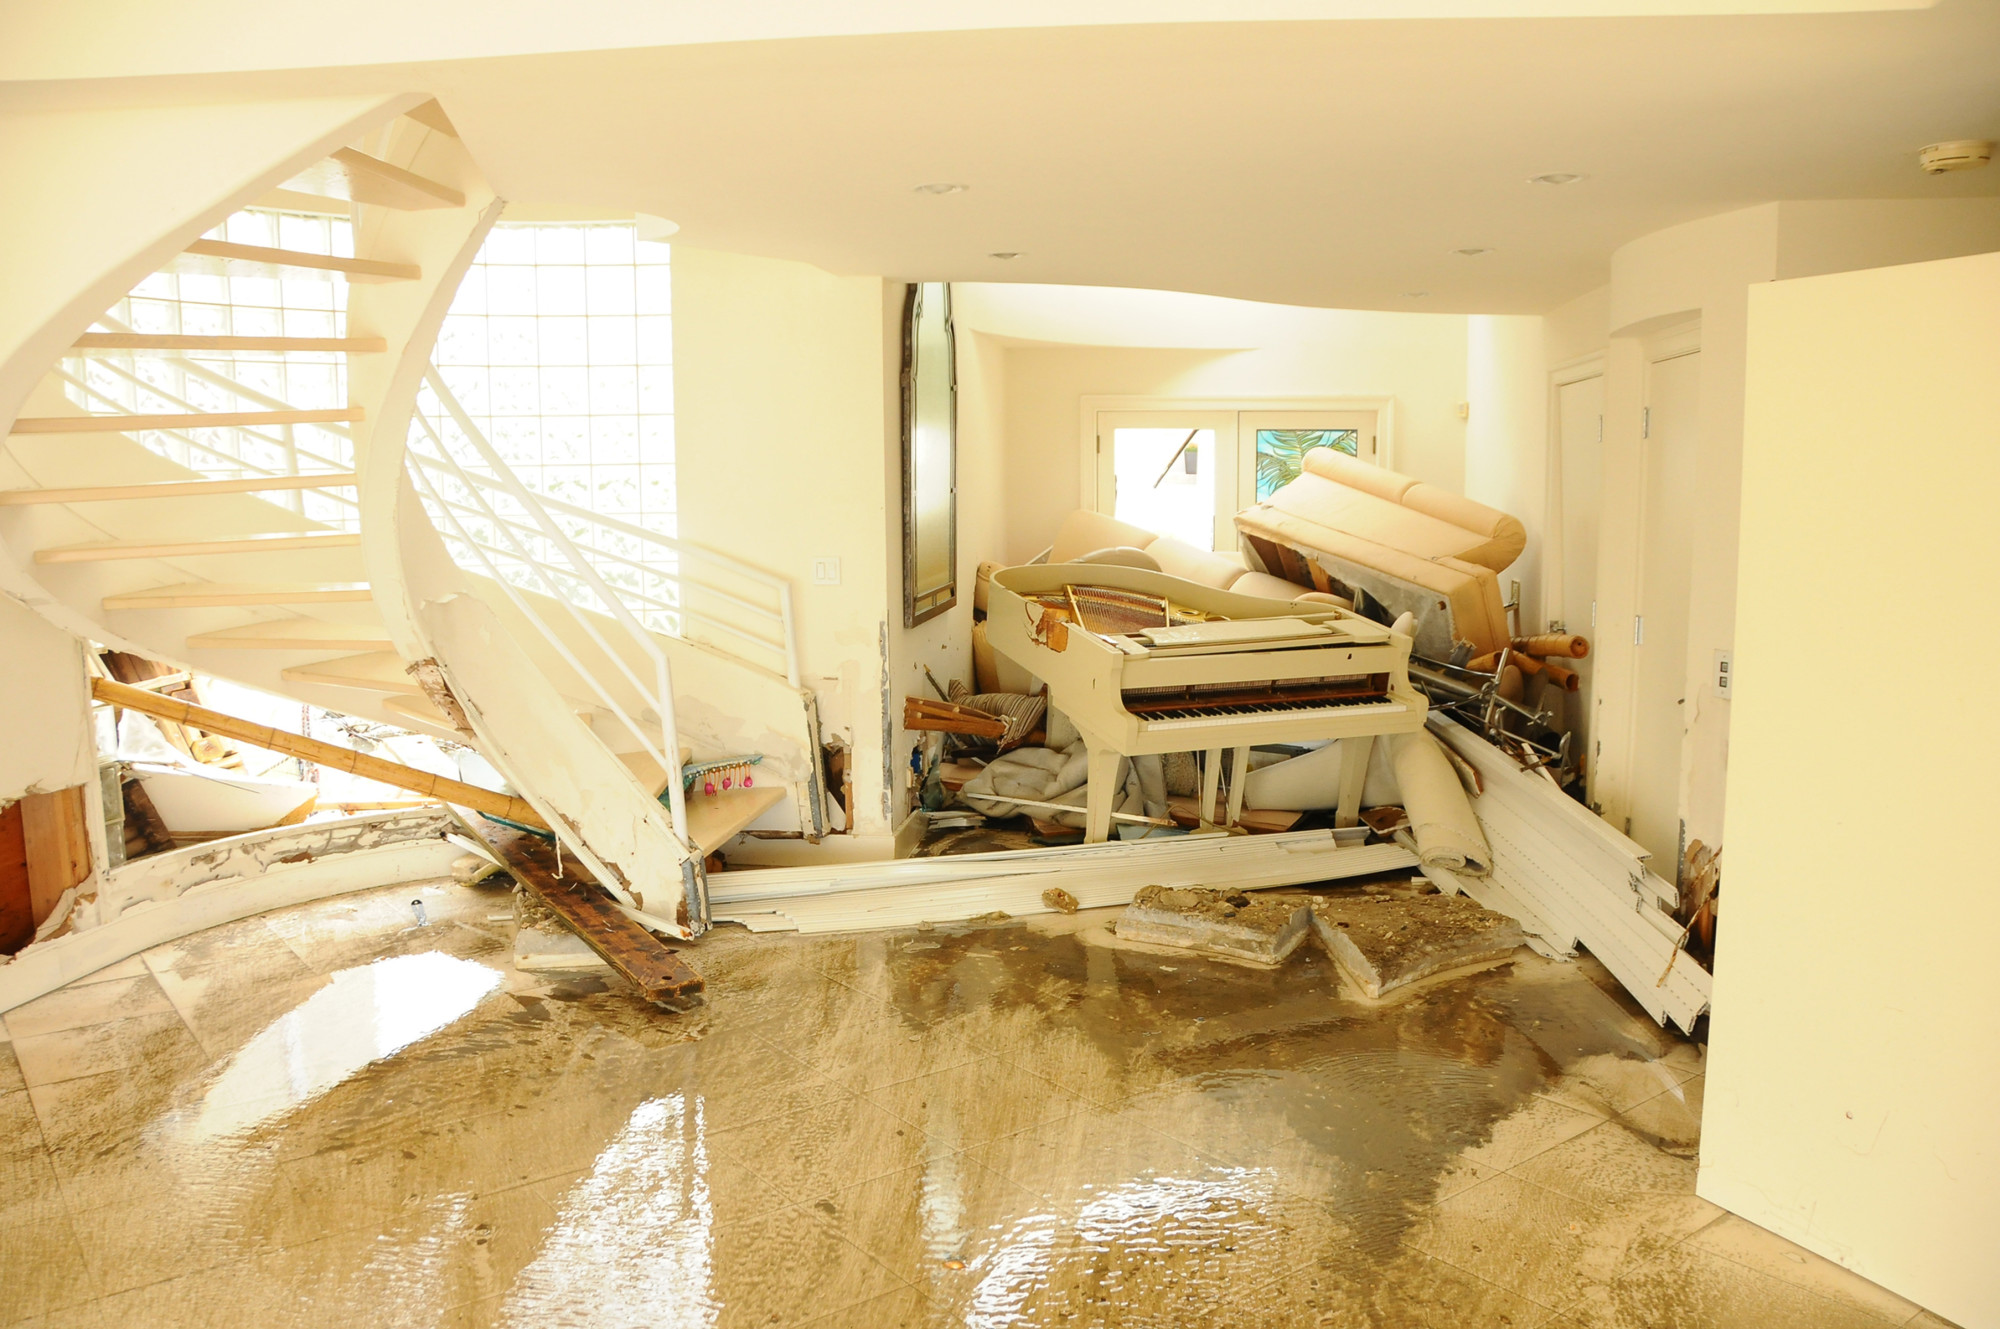 How to Find the Best Water Damage Contractors Near Me: 4 Tips